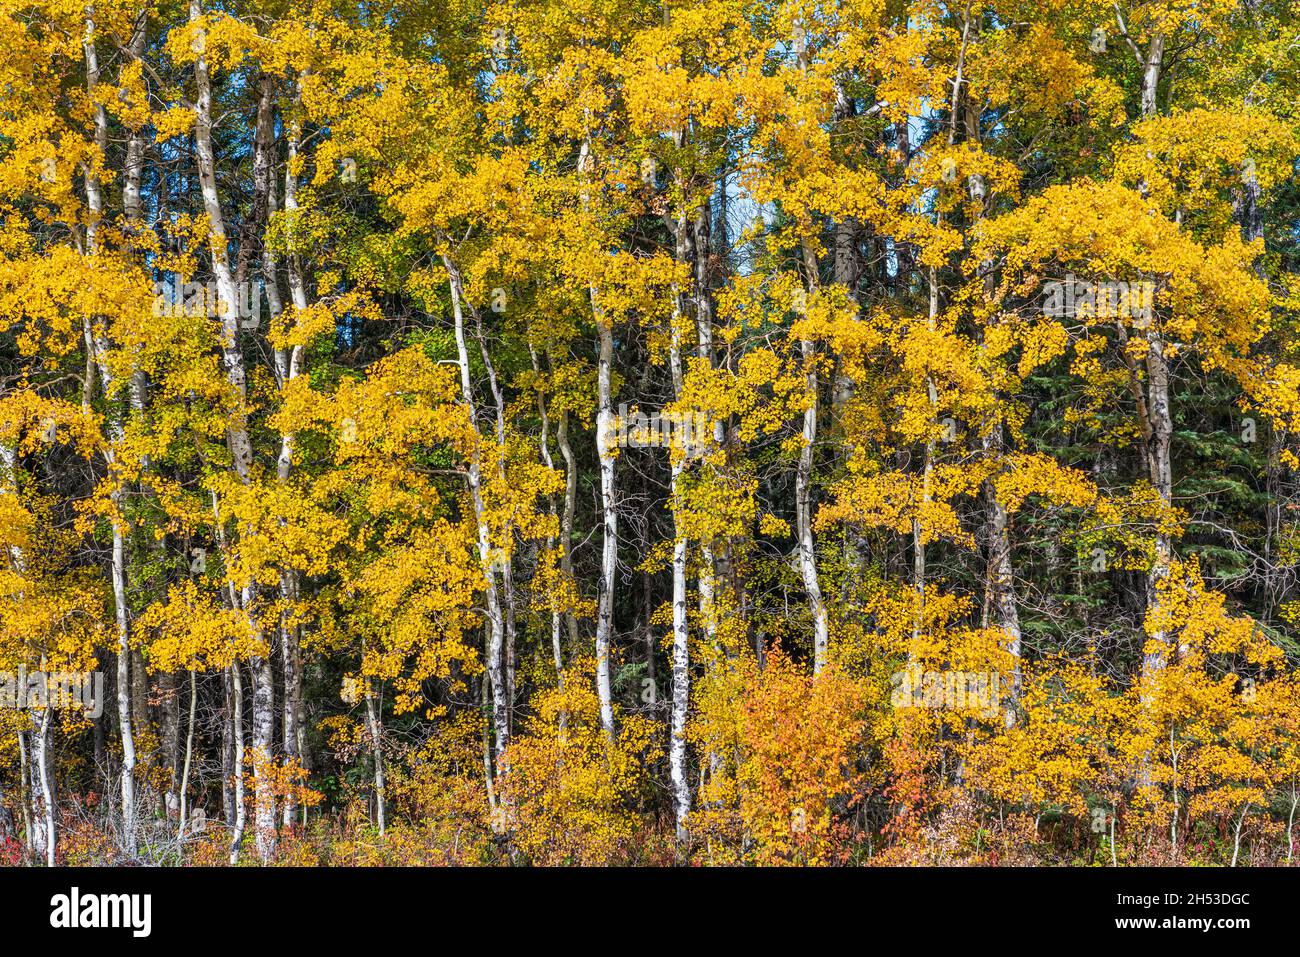 Aspen trees in fall foliage color in northern Manitoba, Canada. Stock Photo